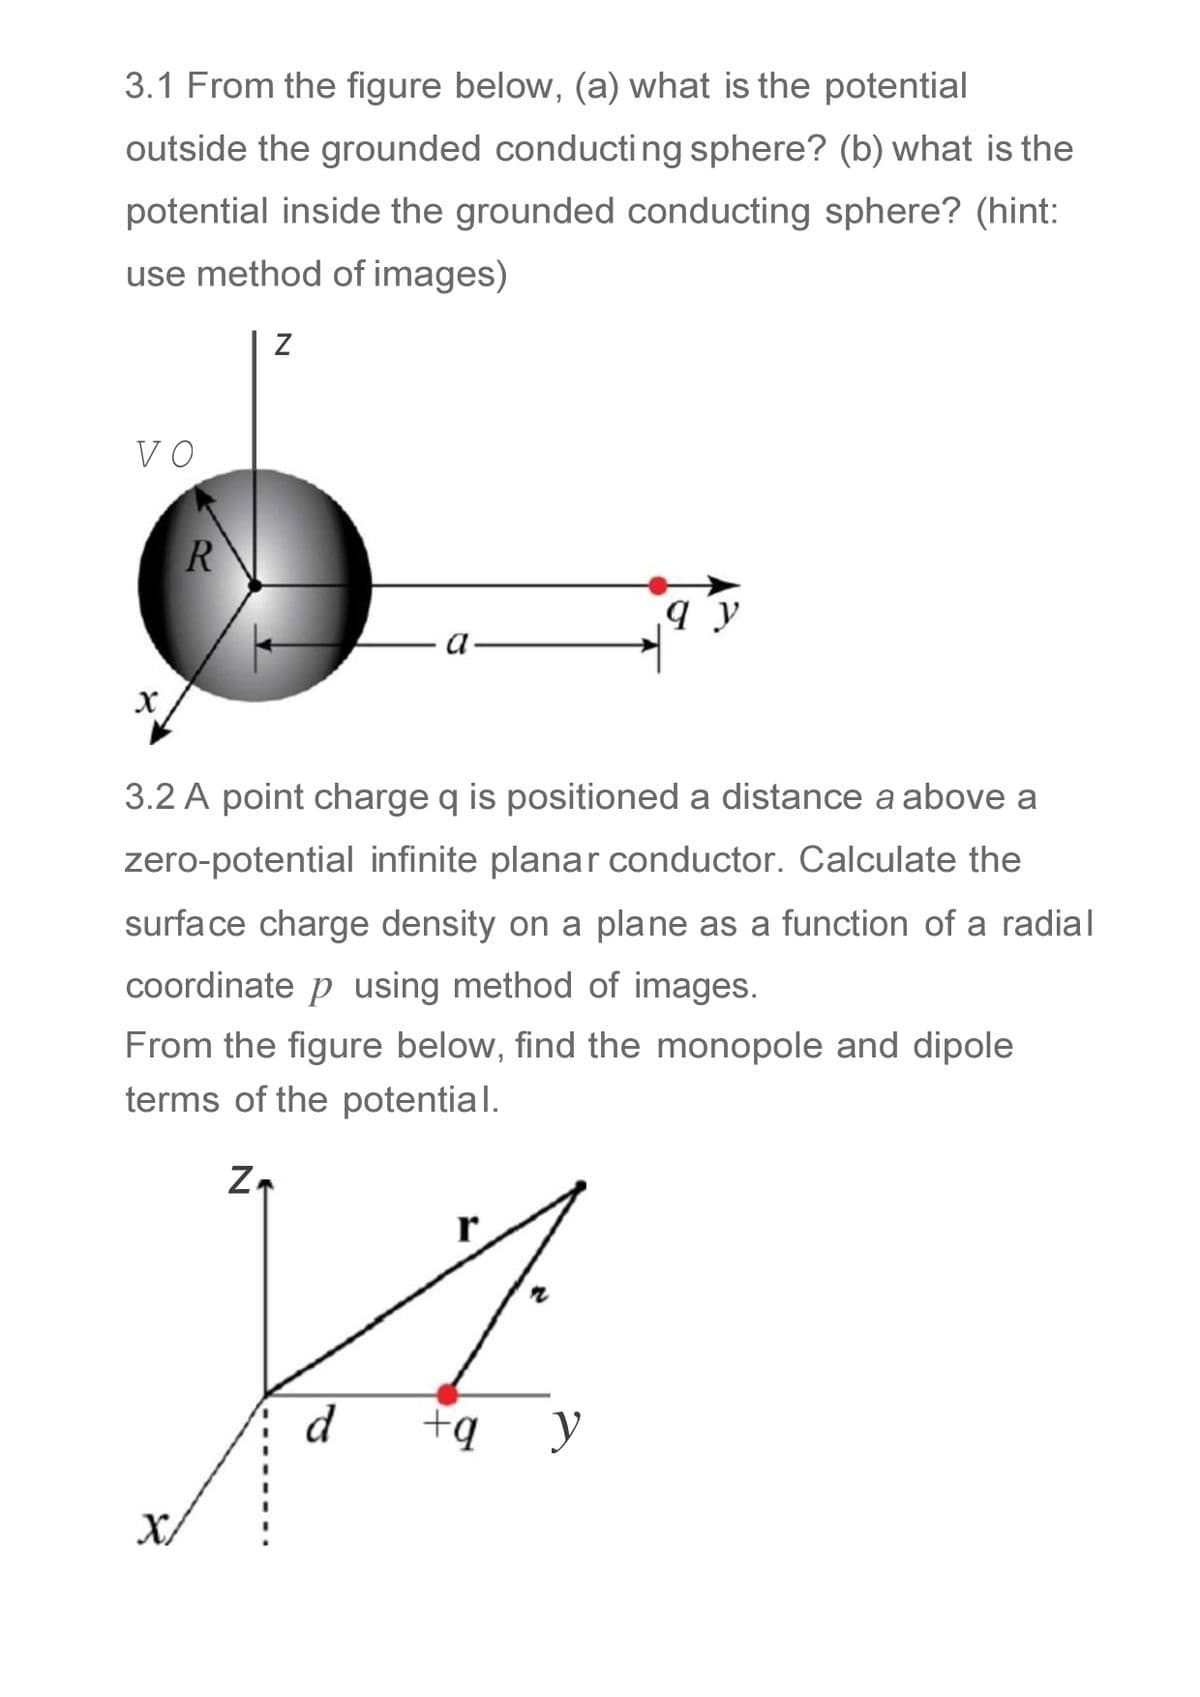 3.1 From the figure below, (a) what is the potential
outside the grounded conducting sphere? (b) what is the
potential inside the grounded conducting sphere? (hint:
use method of images)
VO
3.2 A point charge q is positioned a distance a above a
zero-potential infinite planar conductor. Calculate the
surface charge density on a plane as a function of a radial
coordinate p using method of images.
From the figure below, find the monopole and dipole
terms of the potential.
r
d
+ą
y
X
